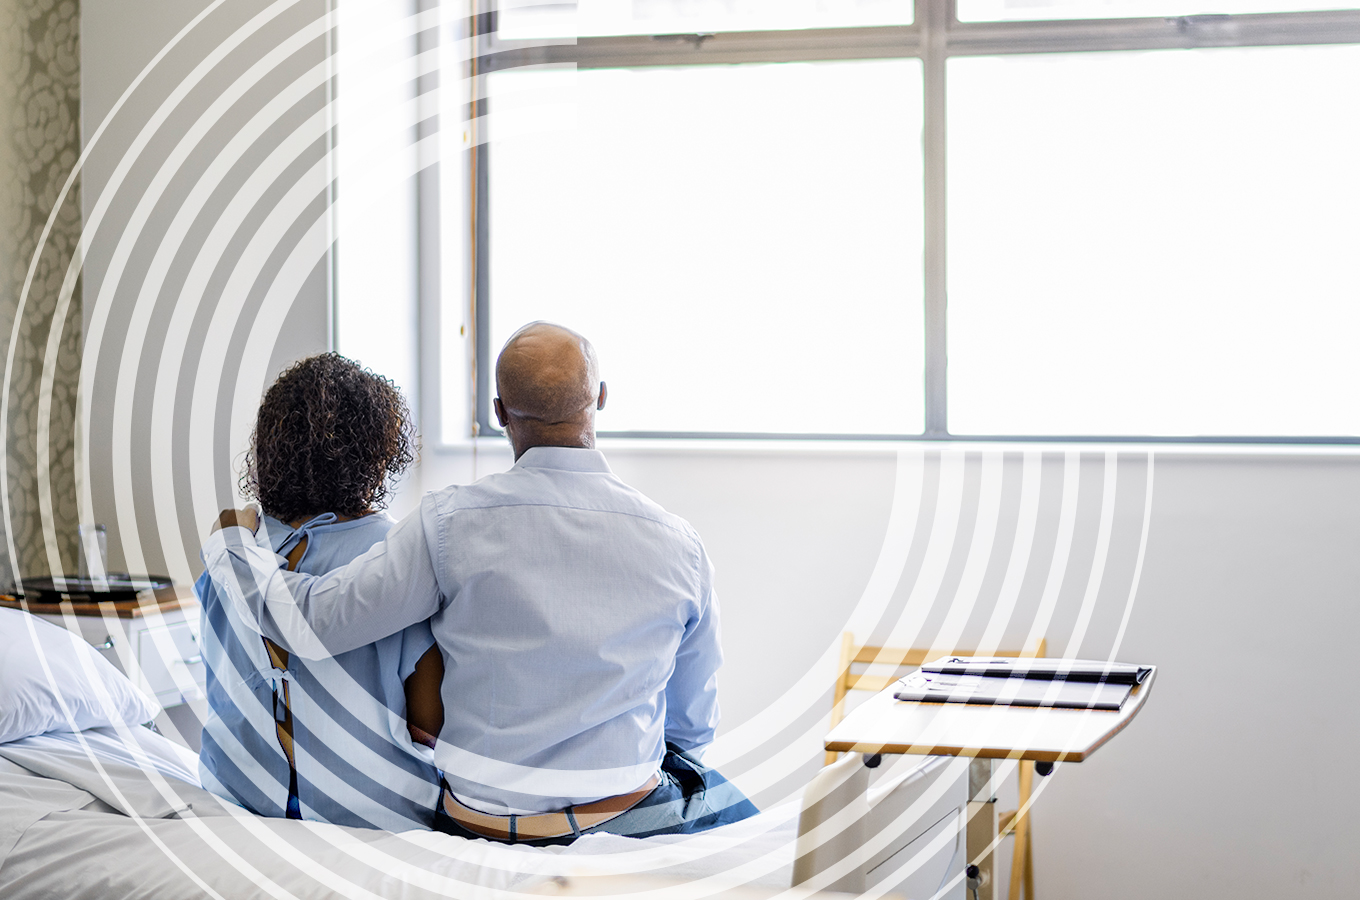 A couple sit on a hospital bed looking at a window. The man has his arm around the woman’s shoulders.